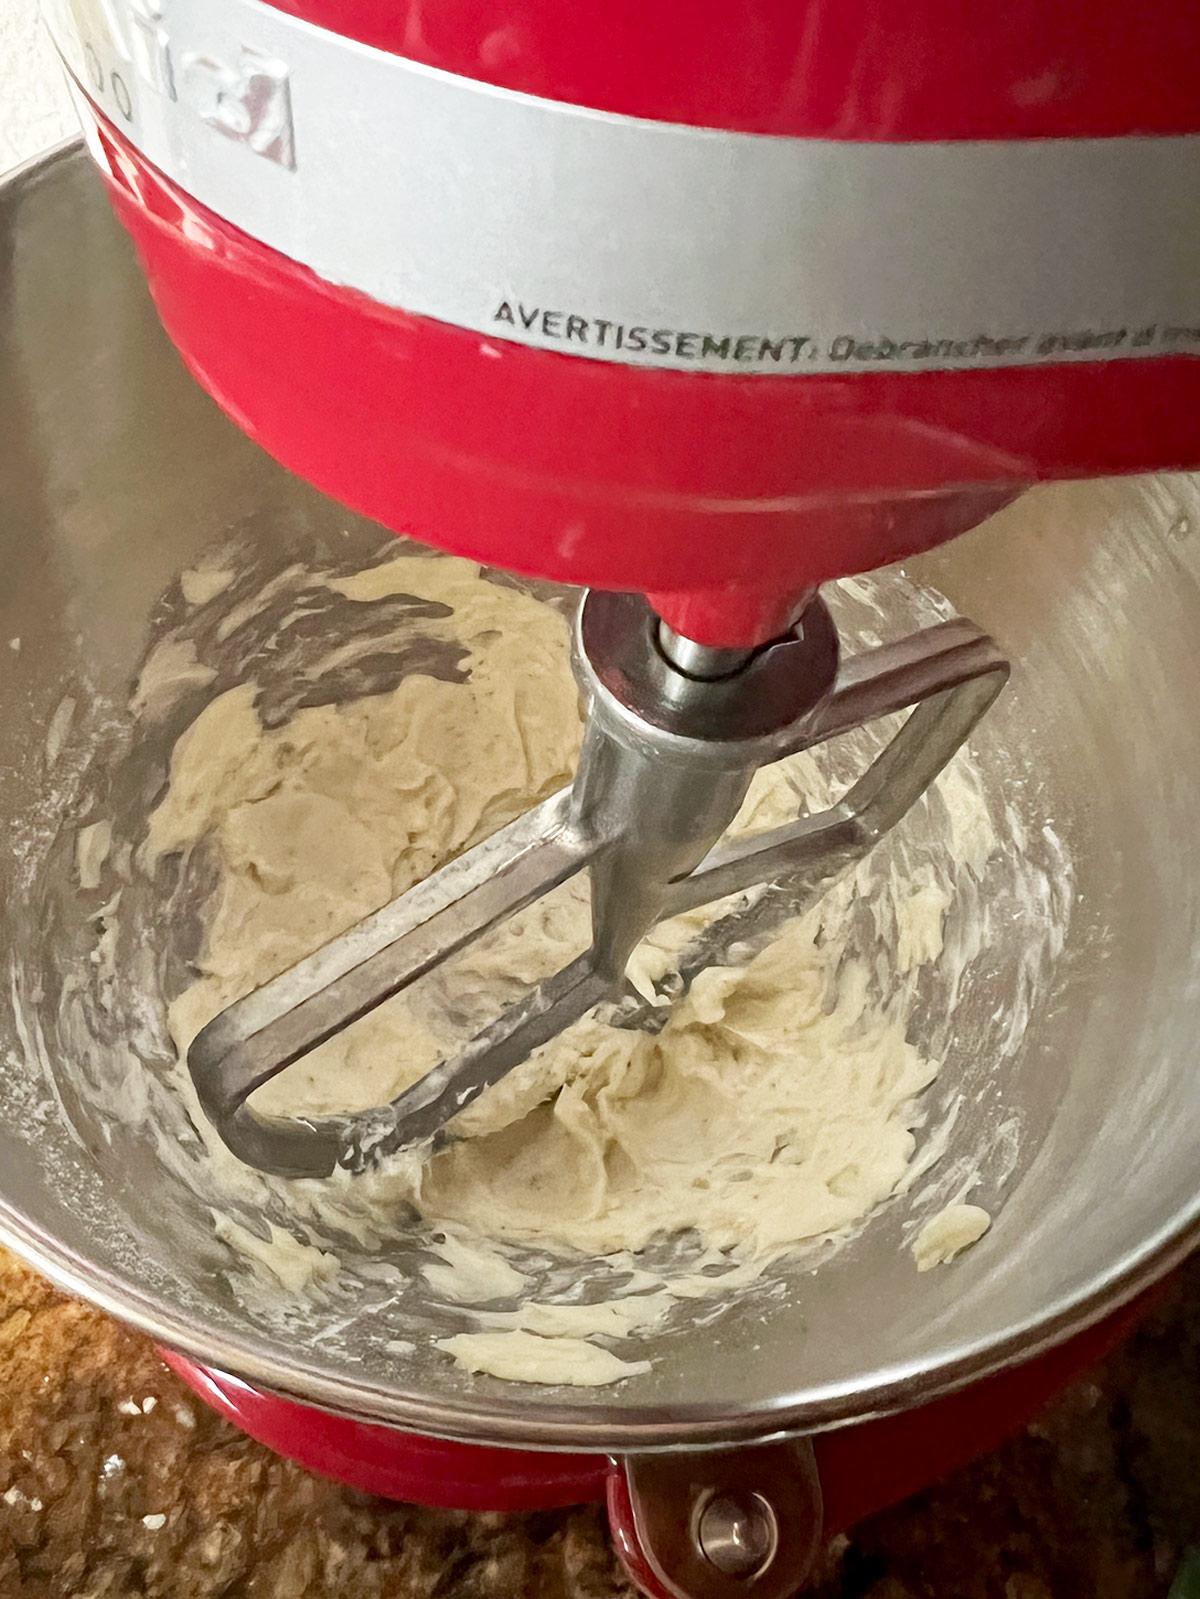 Pistachio snowballs butter creaming in red stand mixer.